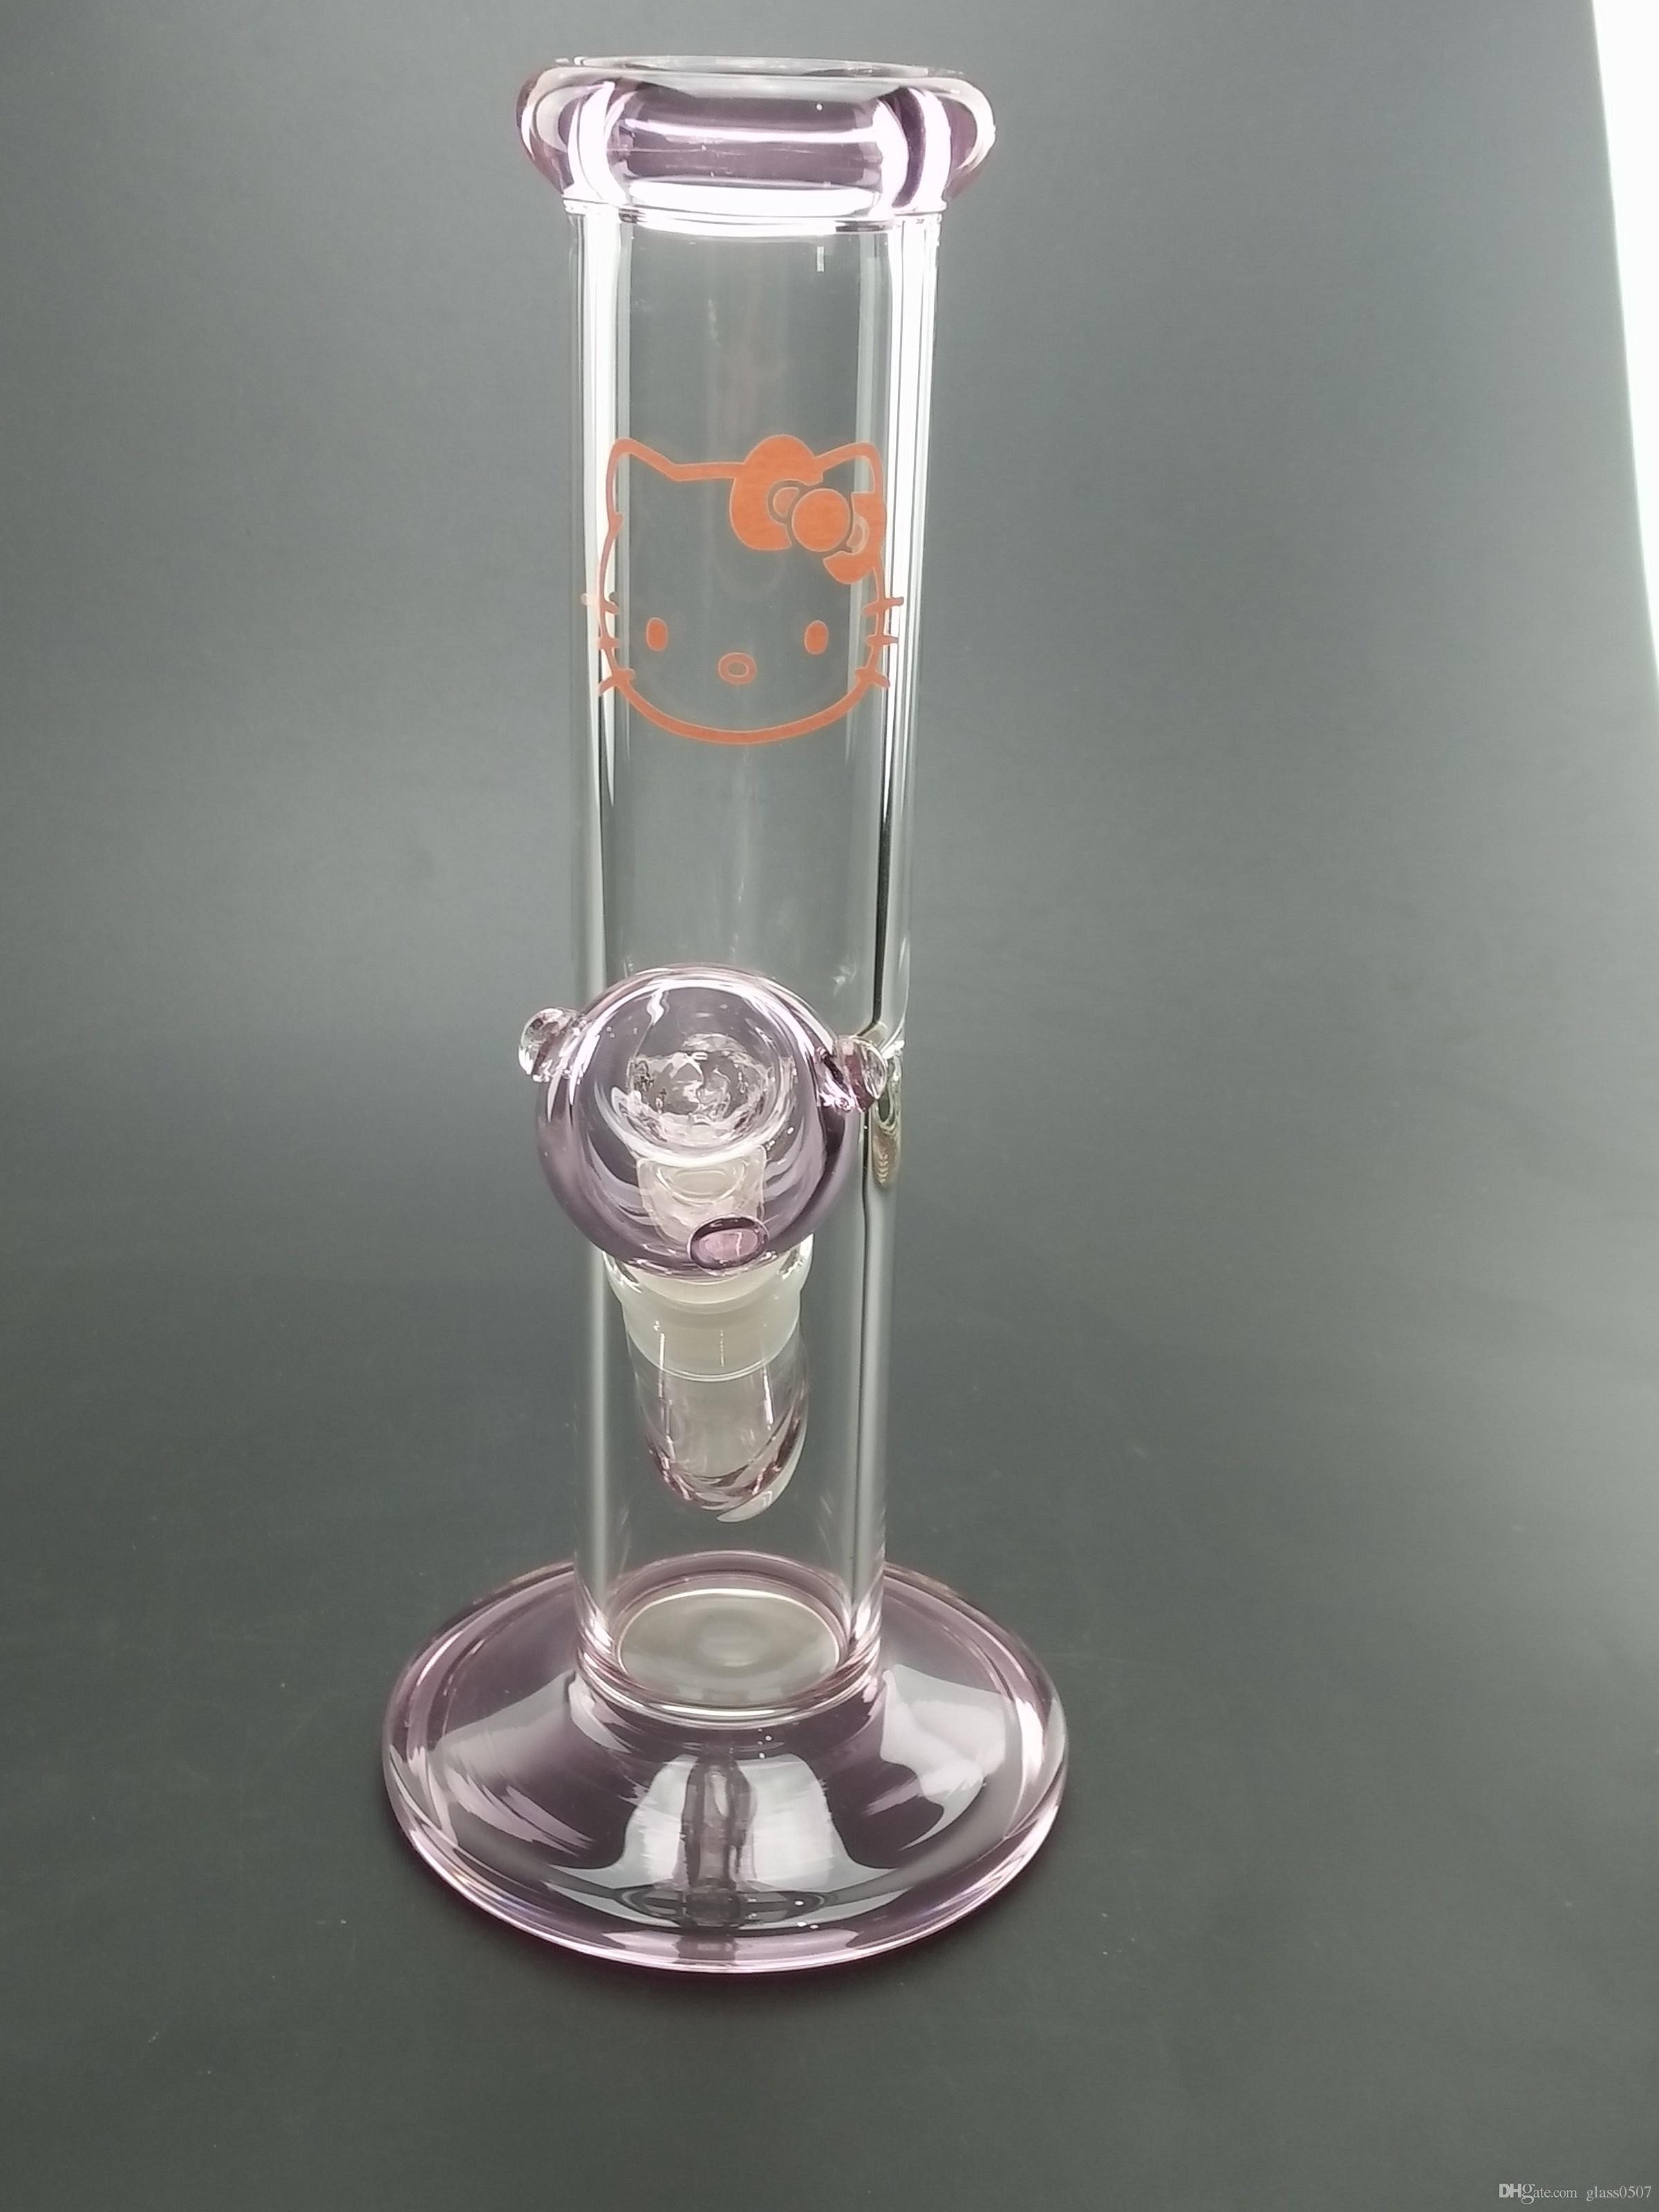 crystal vases for sale of online cheap hookahs glass water pipe glass bongs sturdy glass throughout online cheap hookahs glass water pipe glass bongs sturdy glass inline percolator with accessories factory price by glass0507 dhgate com